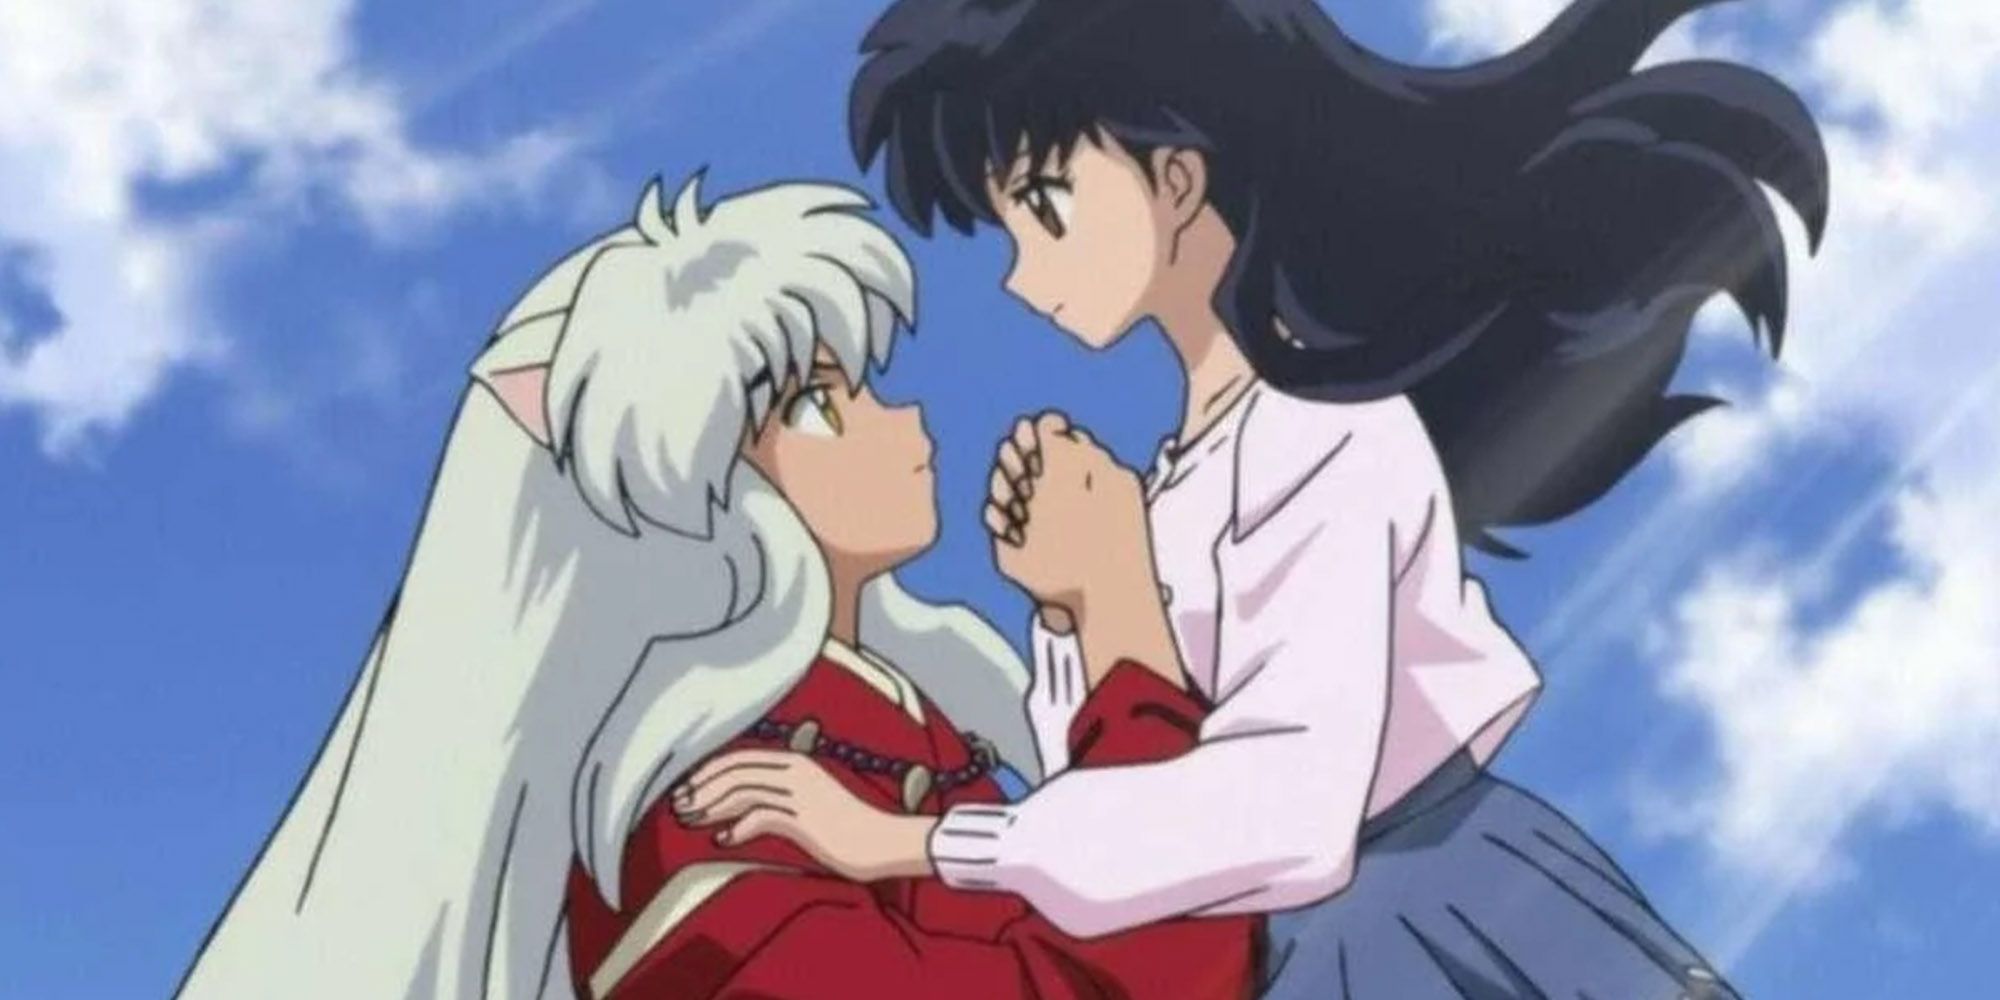 Inuyasha And Kagome Looking At Each Other Romantically